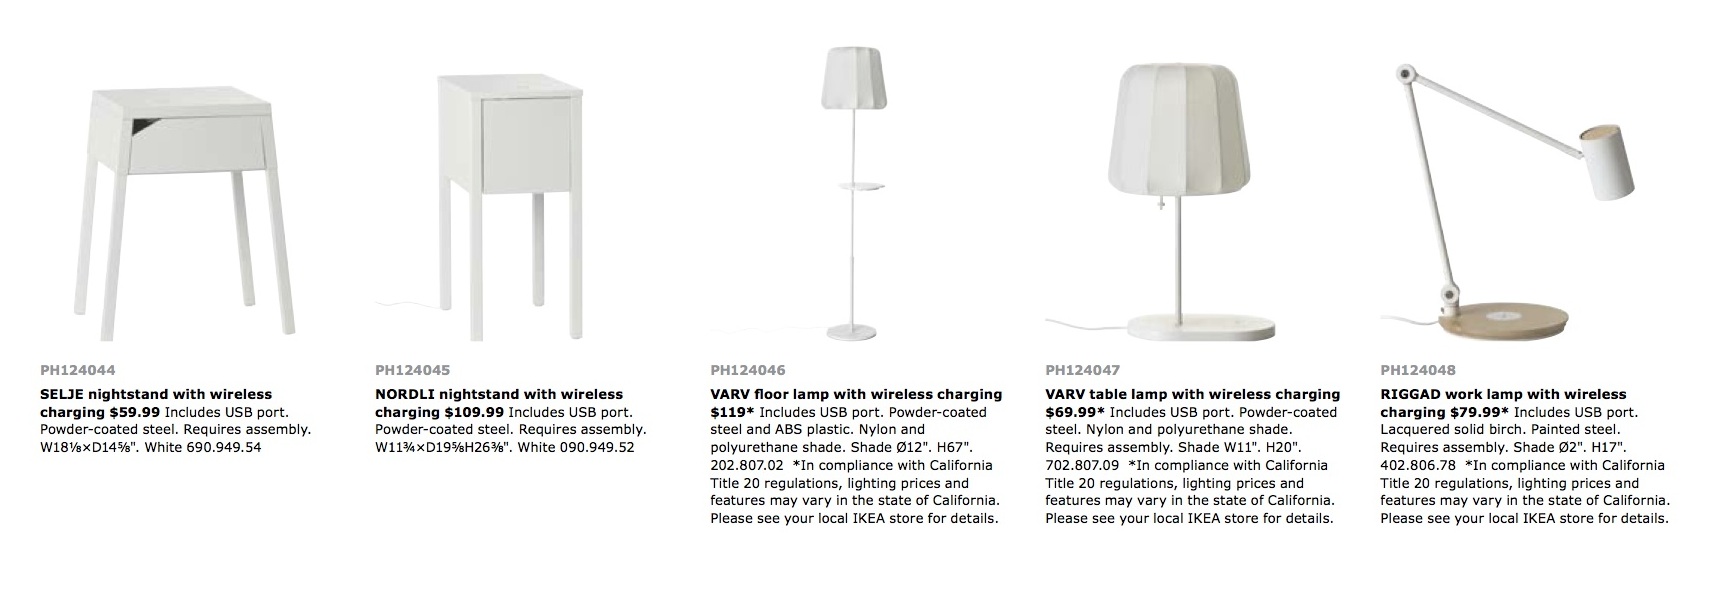 IKEA Releases Catalog Of Furniture That Will Charge Your Phone For You